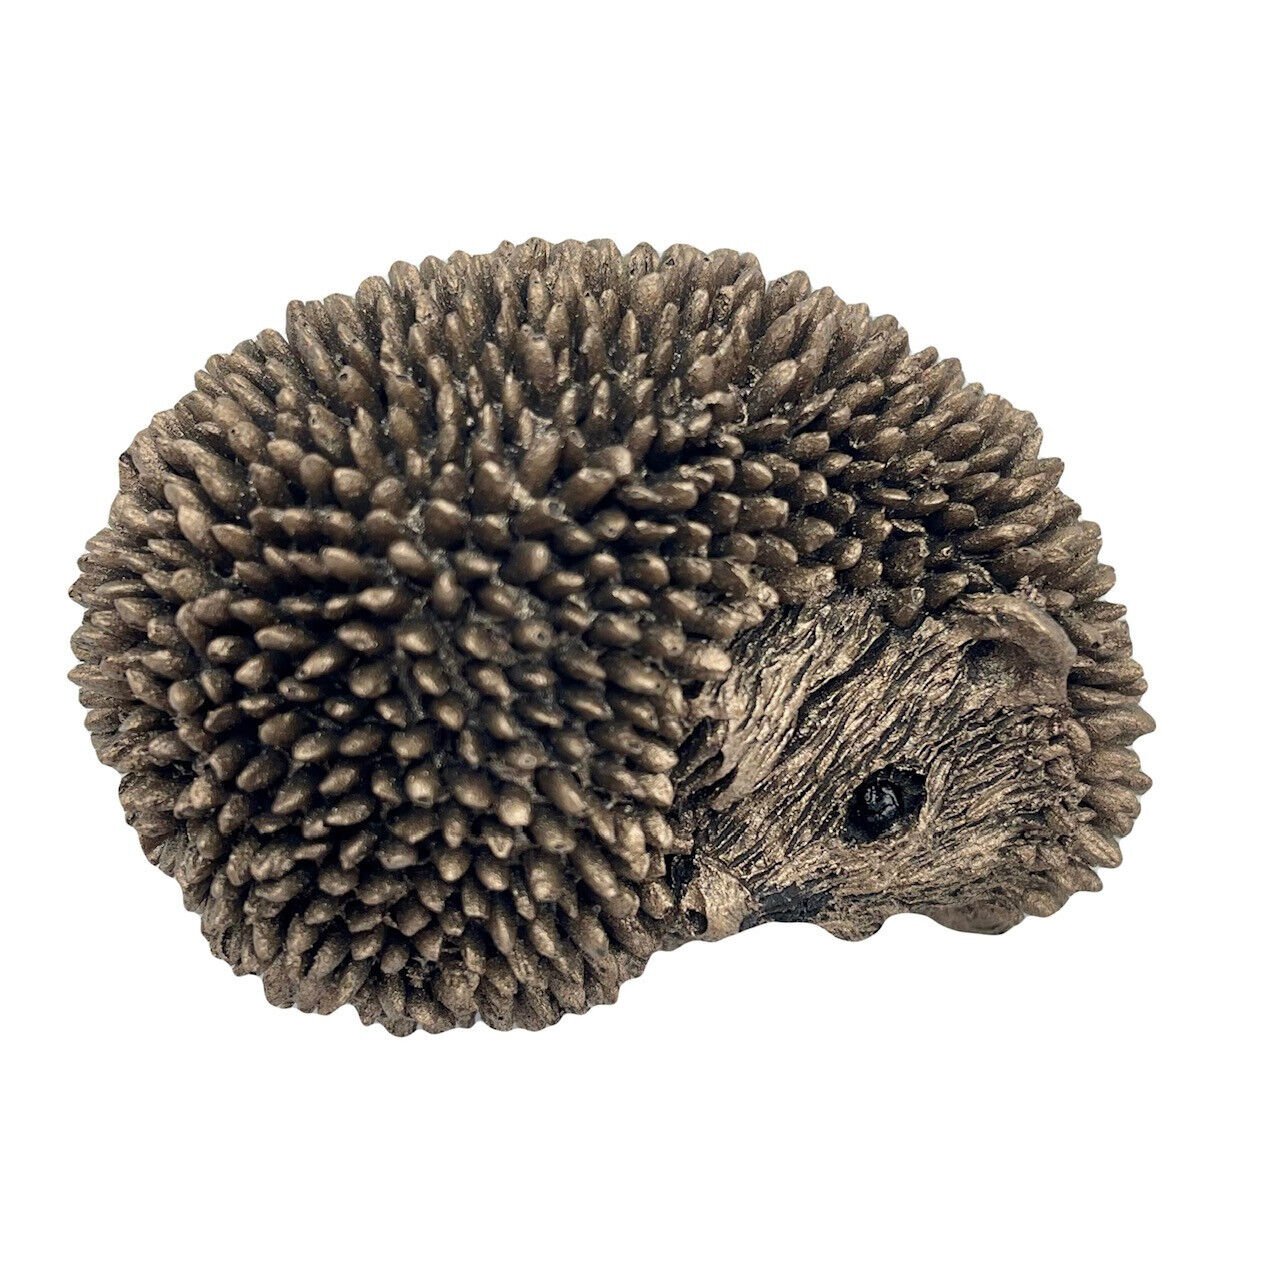 Frith - Dizzy Baby Hoglet Hedgehog Sculpture By Thomas Meadows